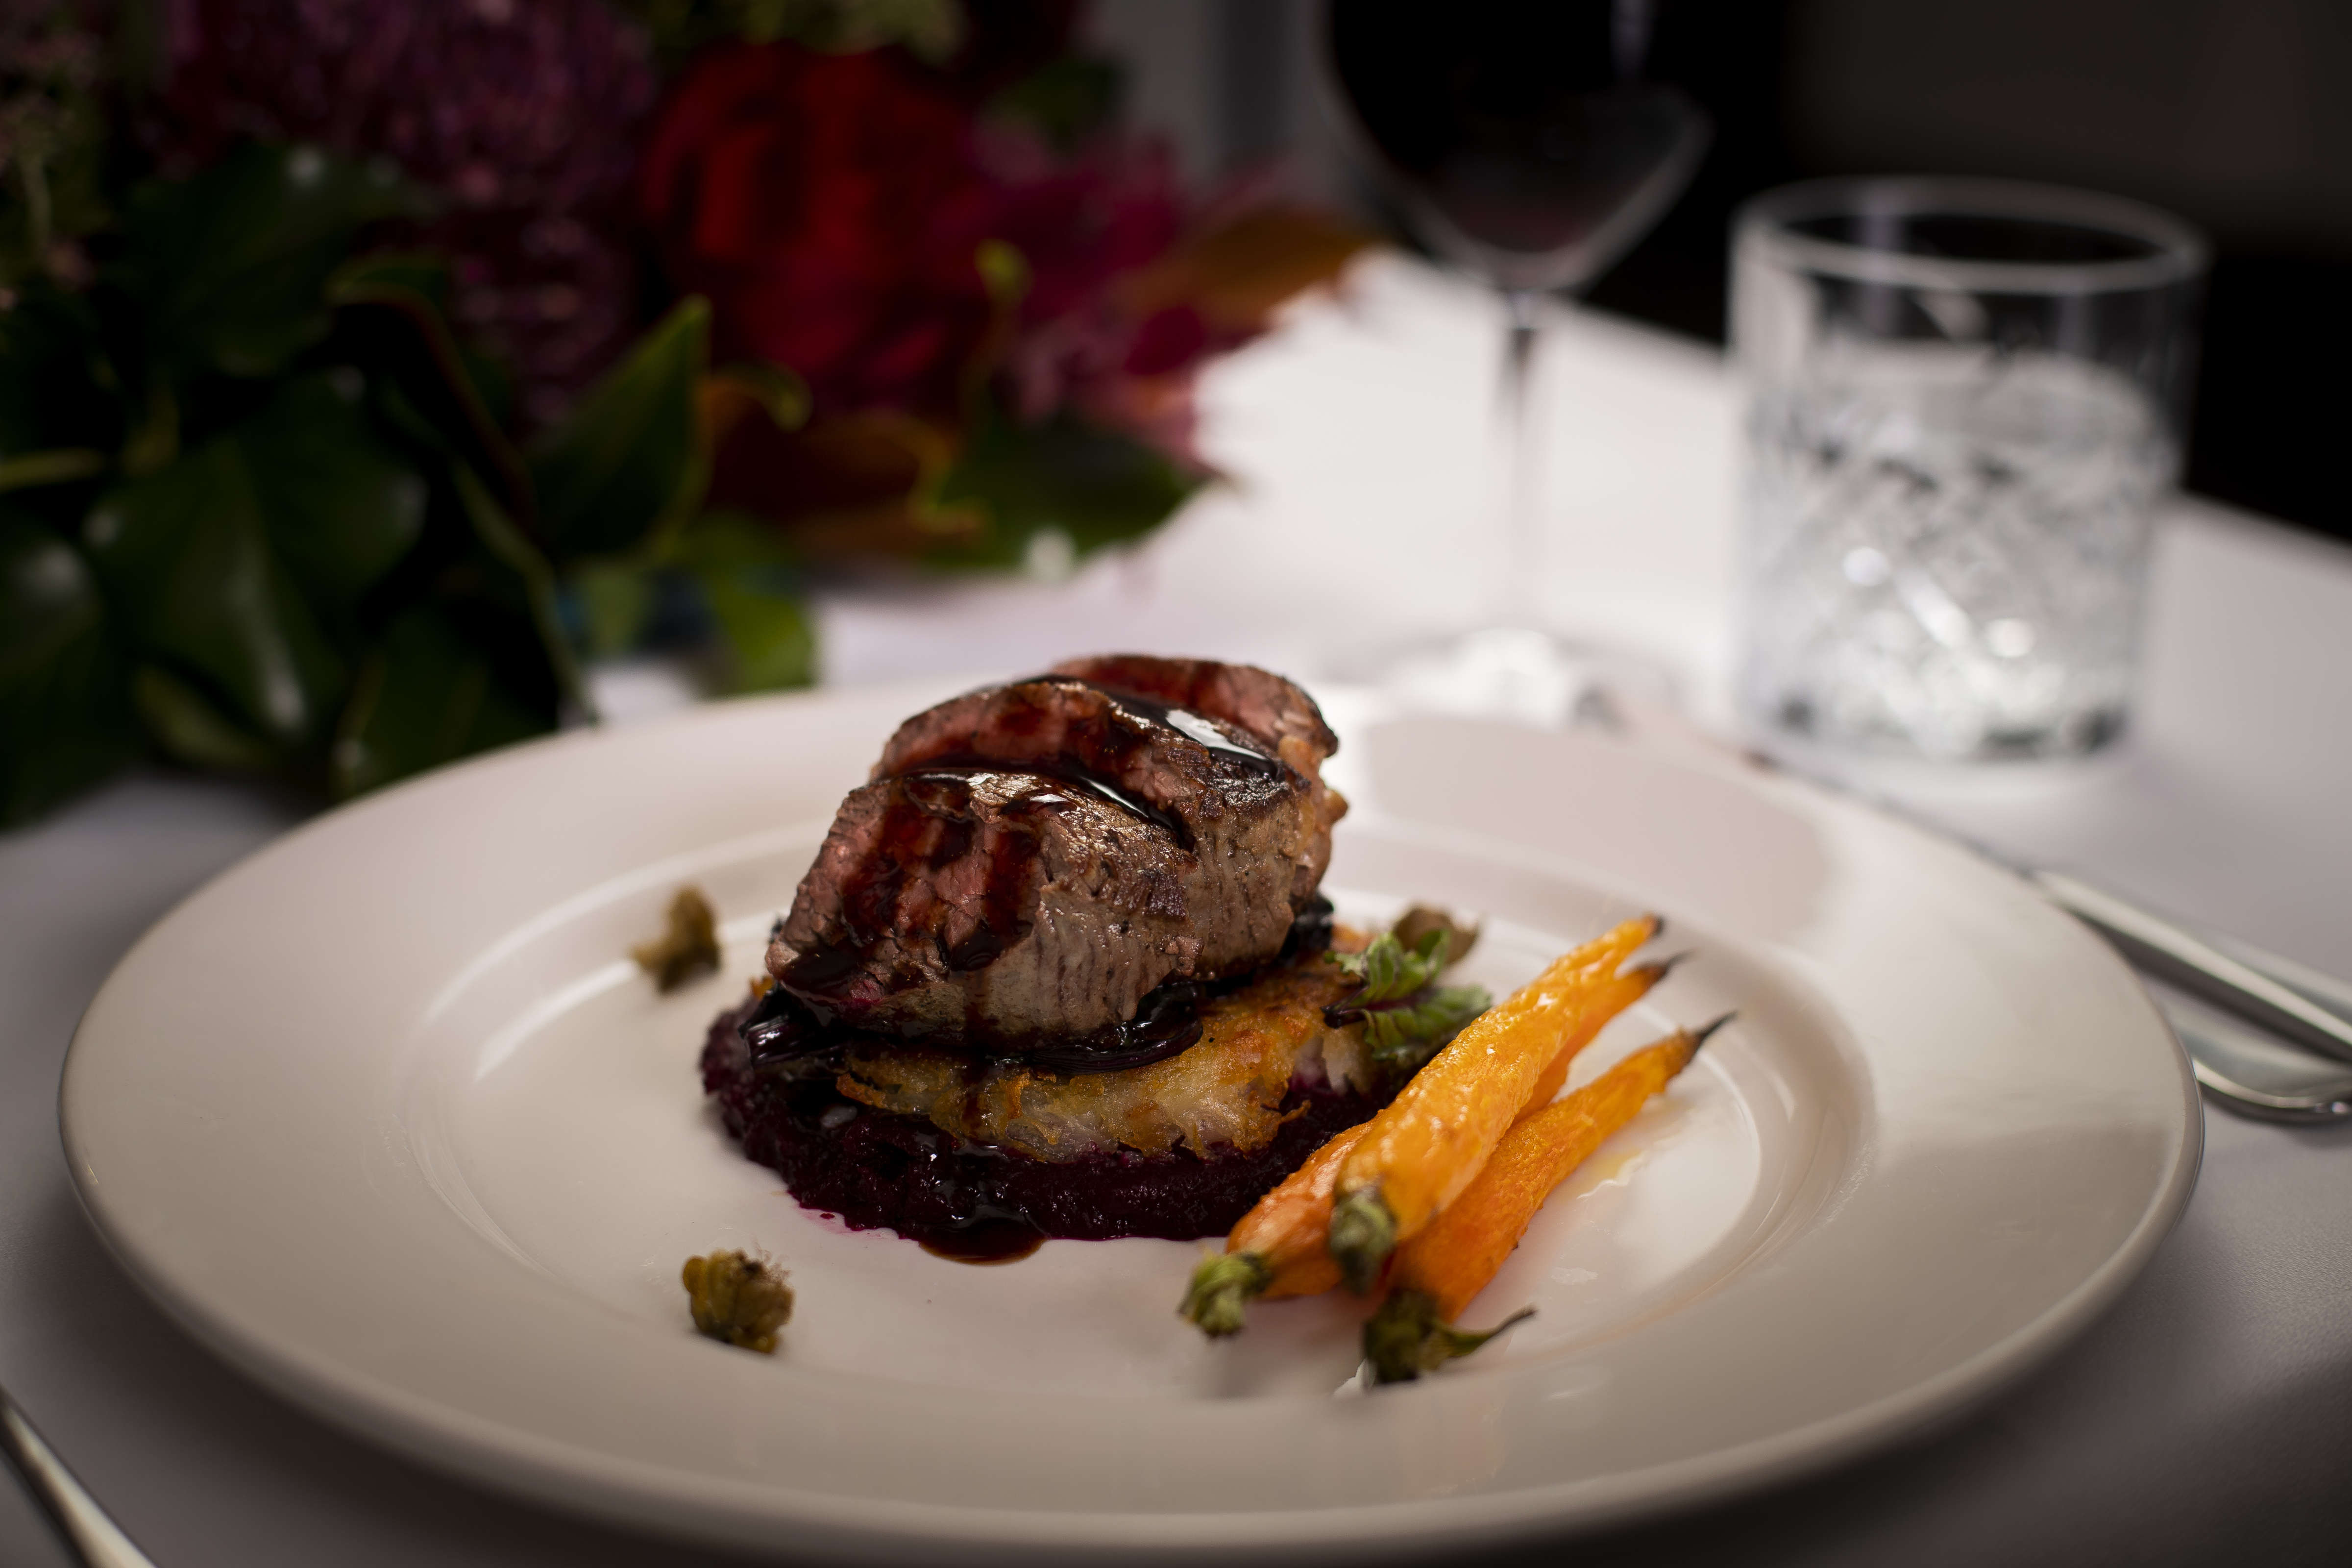 Roasted eye fillet slices on hashbrown with beetroot puree and roast baby carrots glazed with jus on a white dinner plate with fried capers. Photo: Richard Jupe.